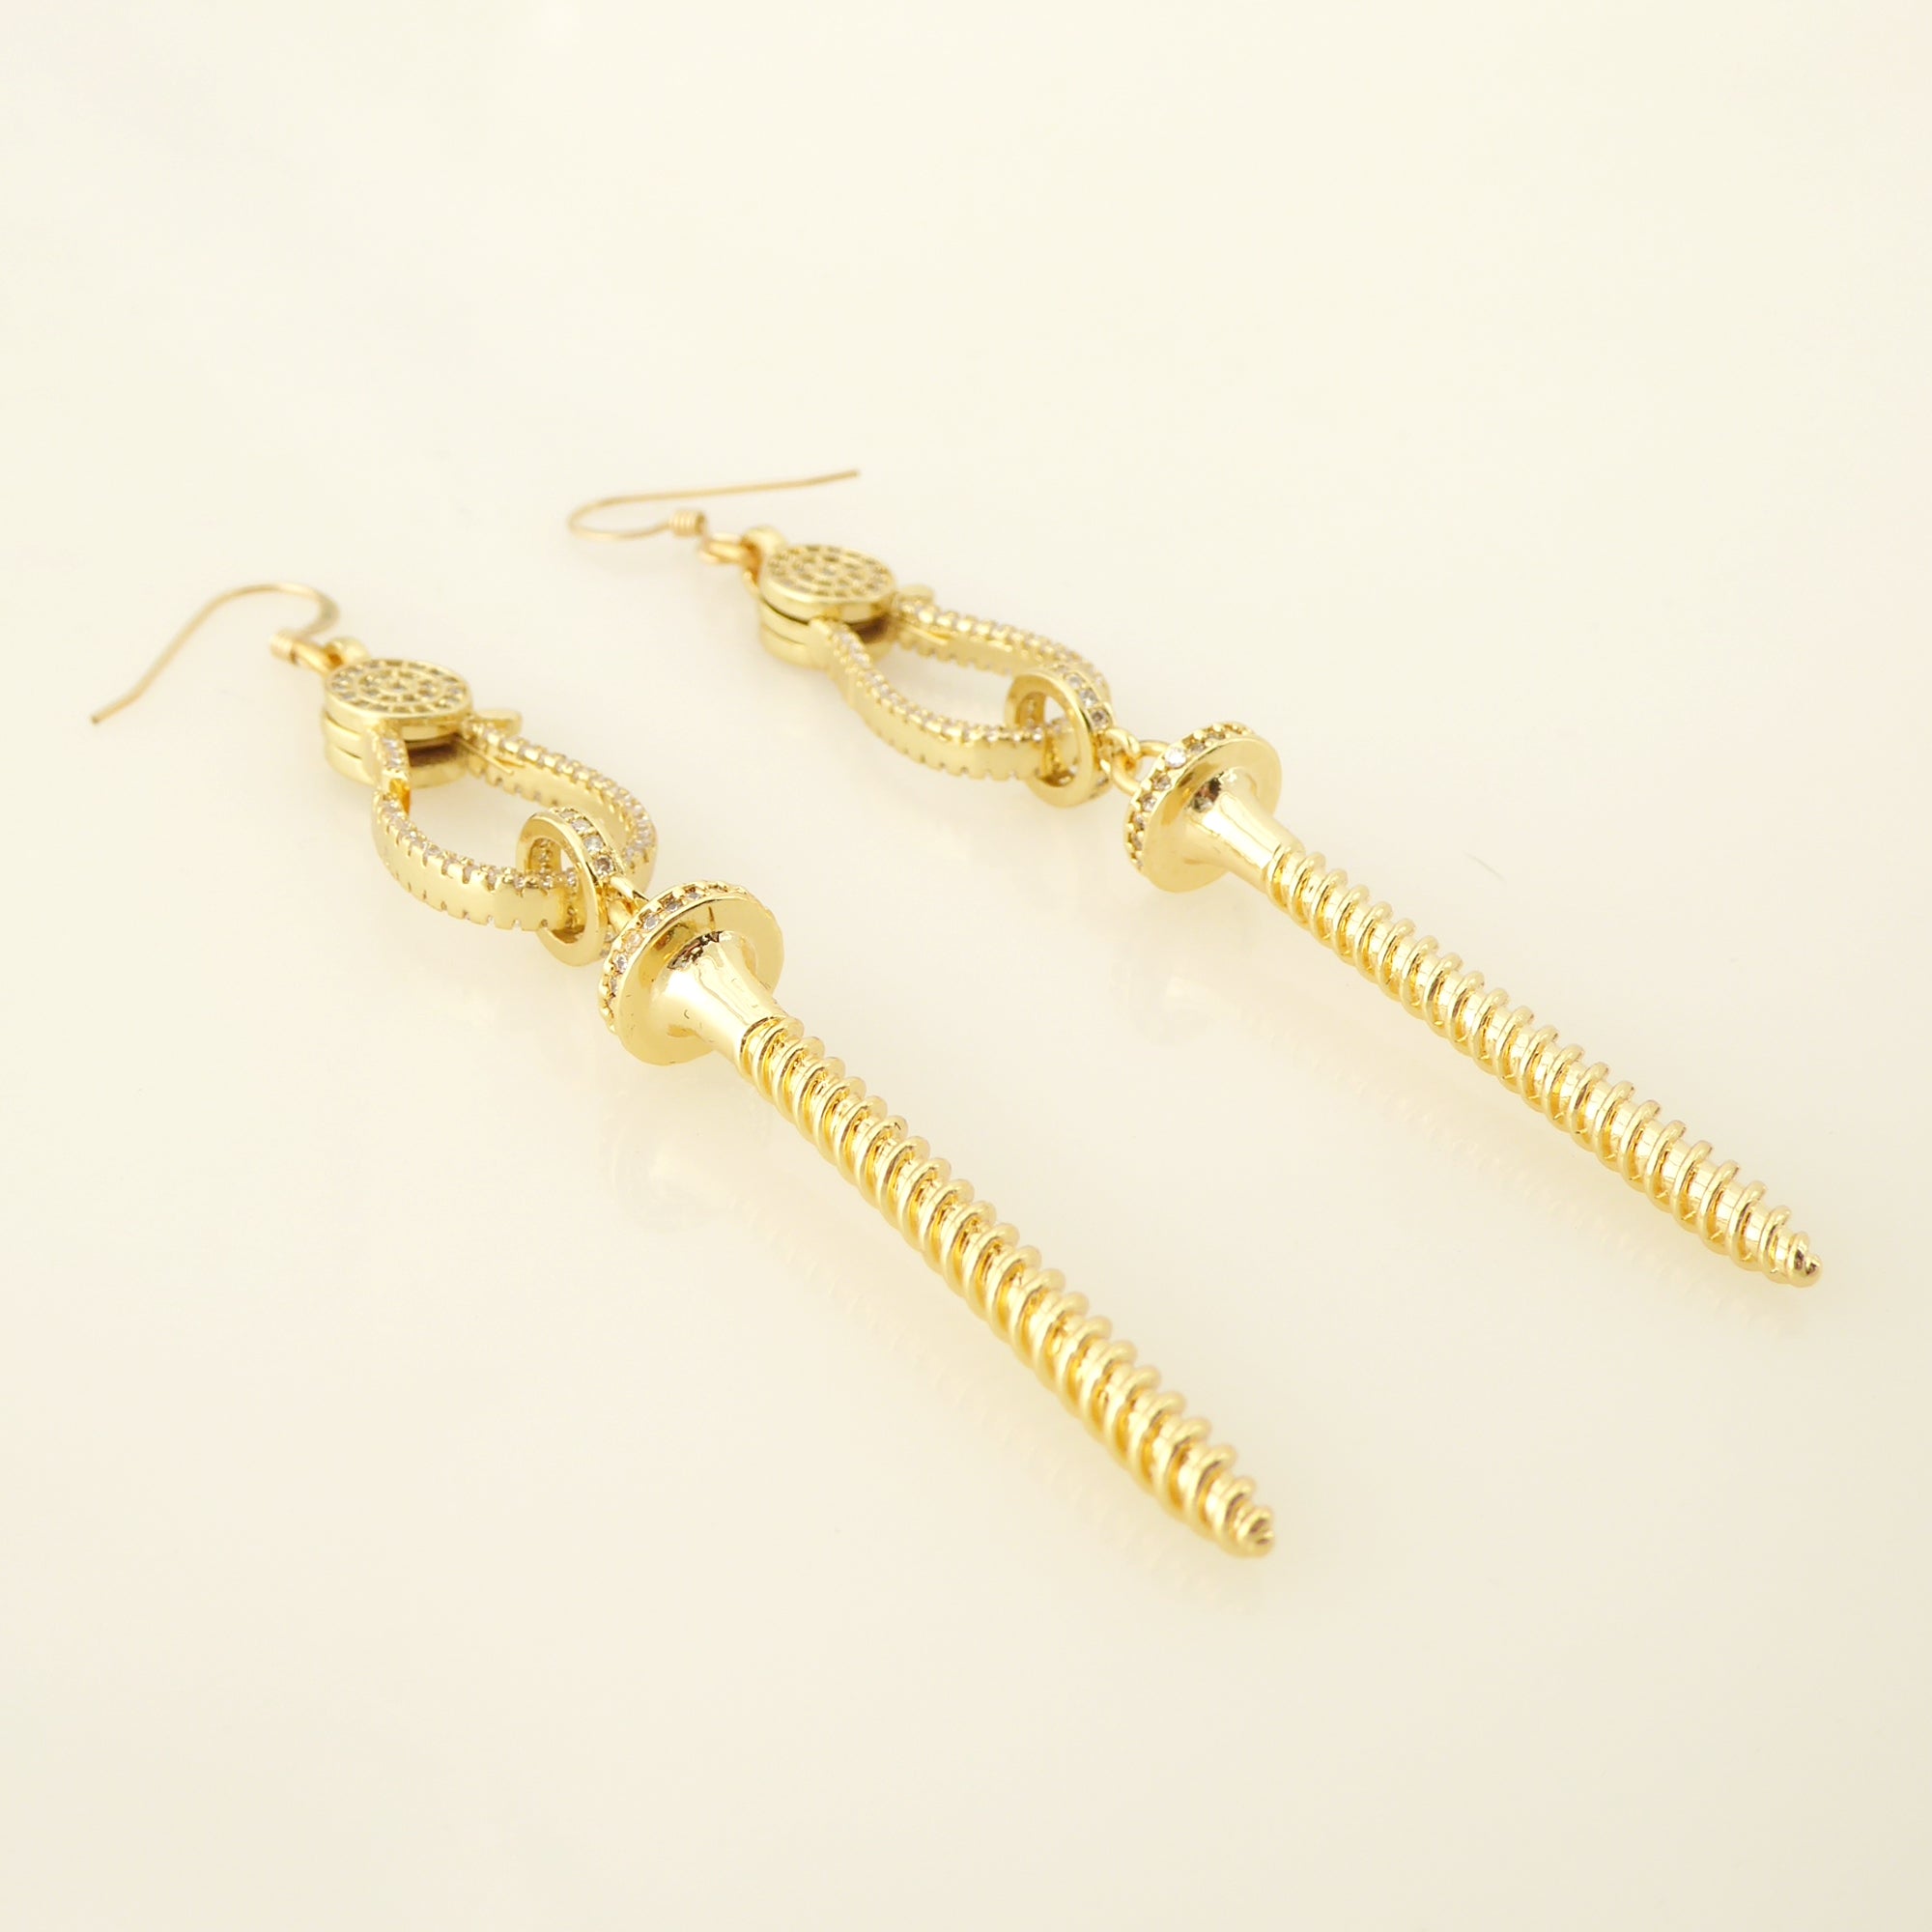 Gold pave rhinestone screw earrings by Jenny Dayco 2